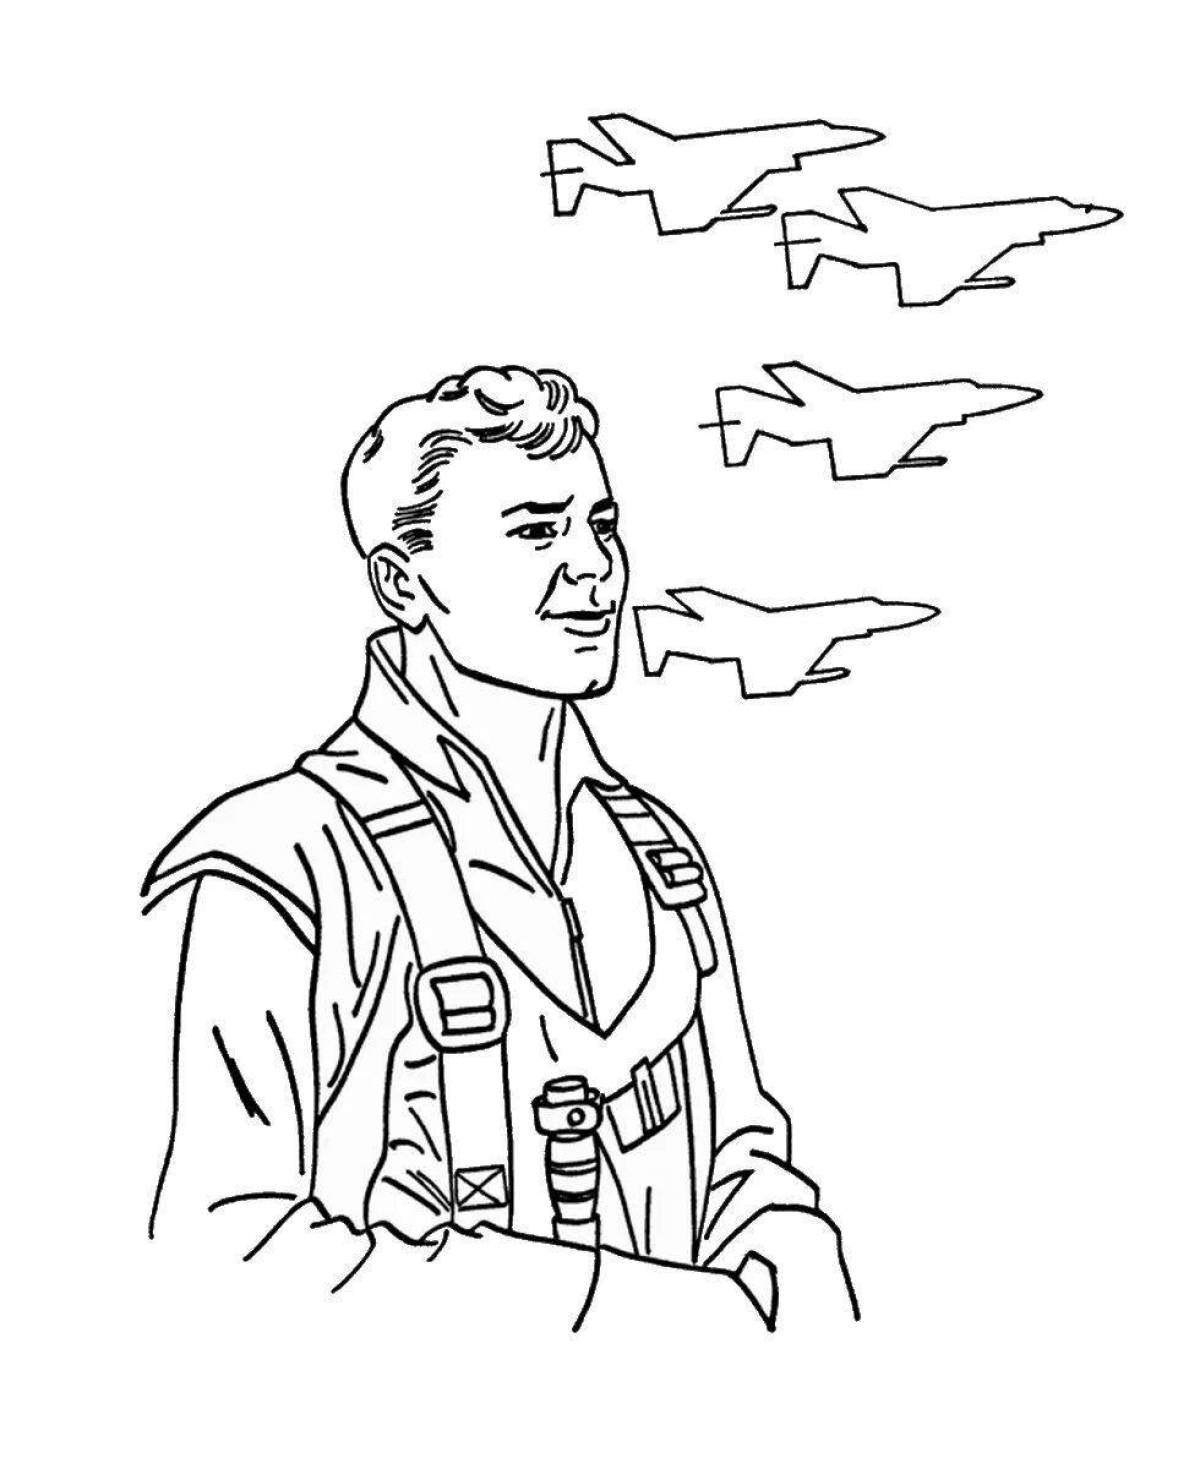 Glorious military portrait coloring page